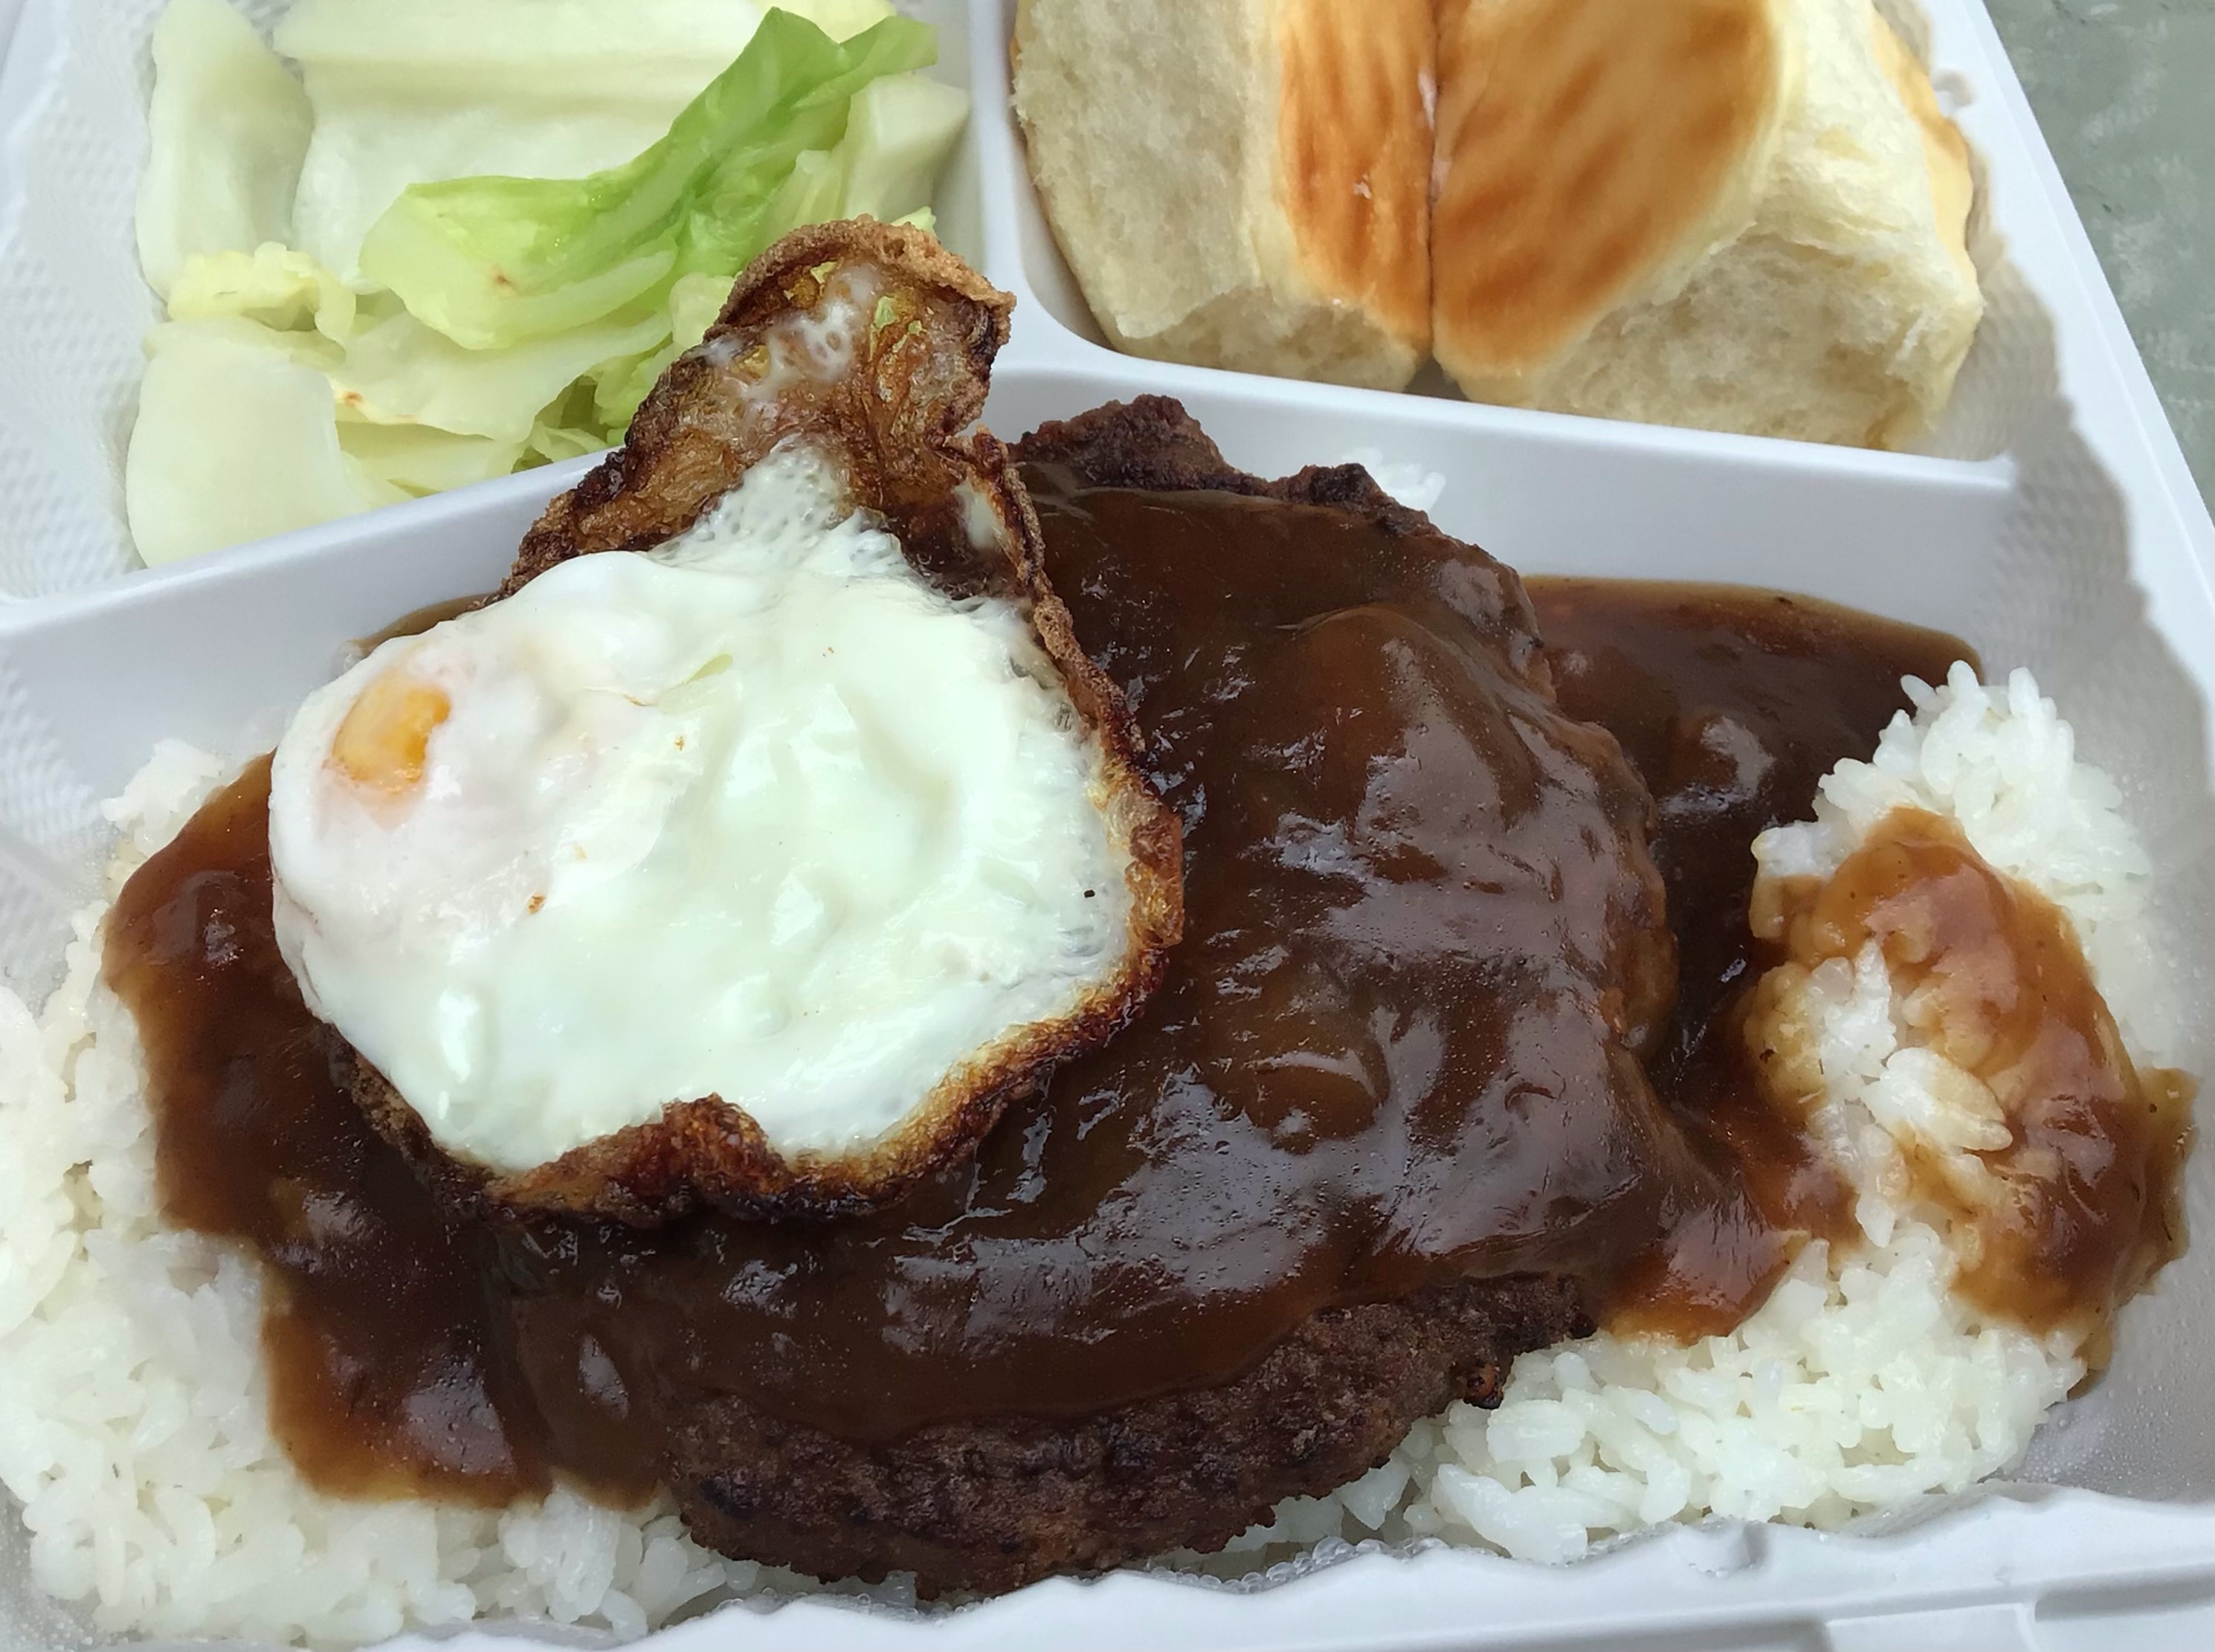 A white plastic to-go tray features a generous portion of loco moco (a seasoned hamburger patty covered in brown gravy and topped with a fried egg) atop a bed of steamed white rice in the main dish compartment. The side dish compartments contain, on the left, a single serving of cooked cabbage, and, on the right, two Hawaiian rolls.Photo by Rachael McMillan.